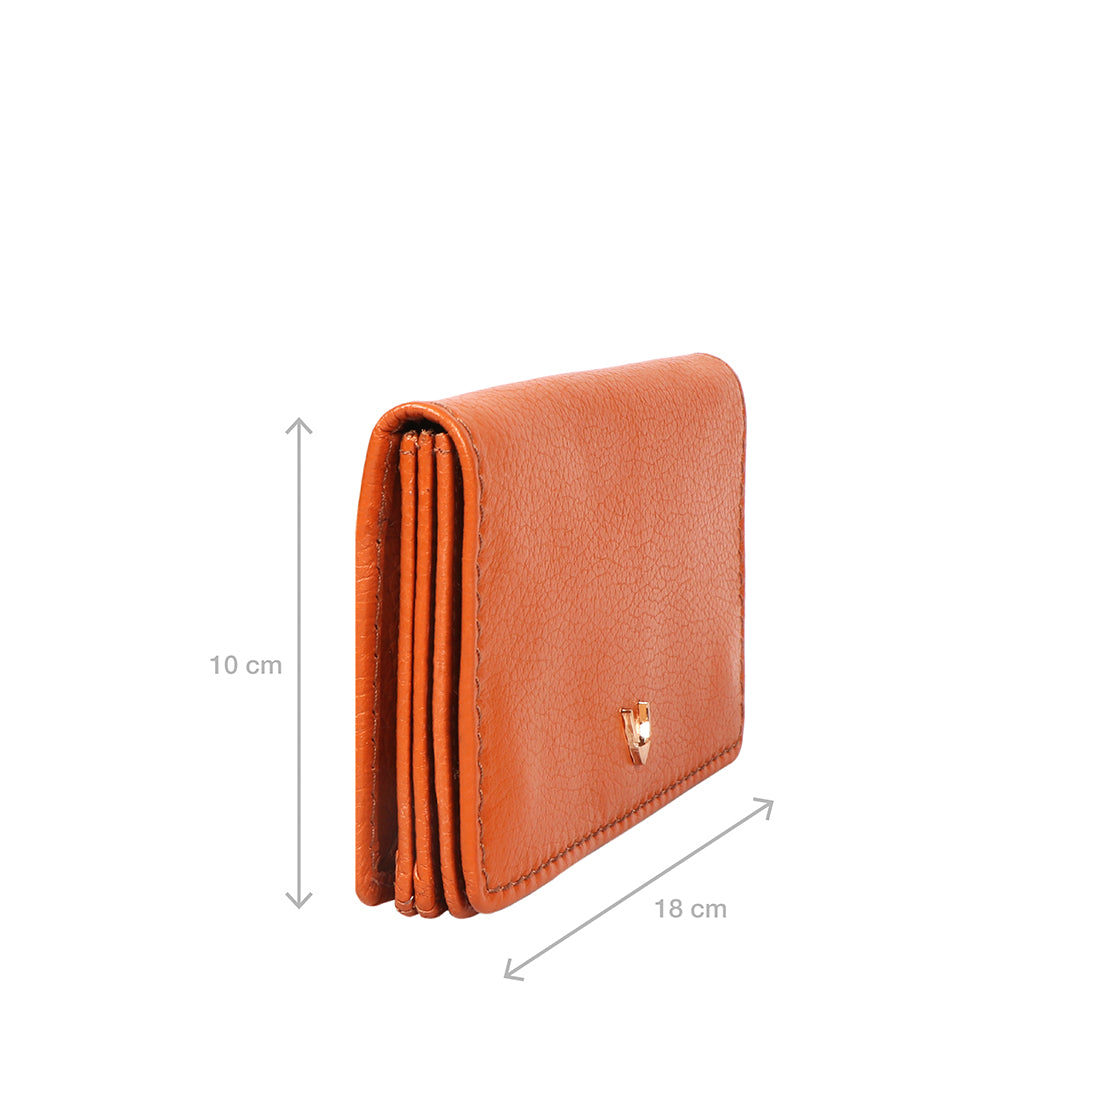 Woodland Leathers 100% Genuine Leather Ladies Purse and Wallet for Women,  Multi Card Holder RFID Blocking Purses for Women with Coin Zipper Pocket  and Cash Compartment : Amazon.co.uk: Fashion